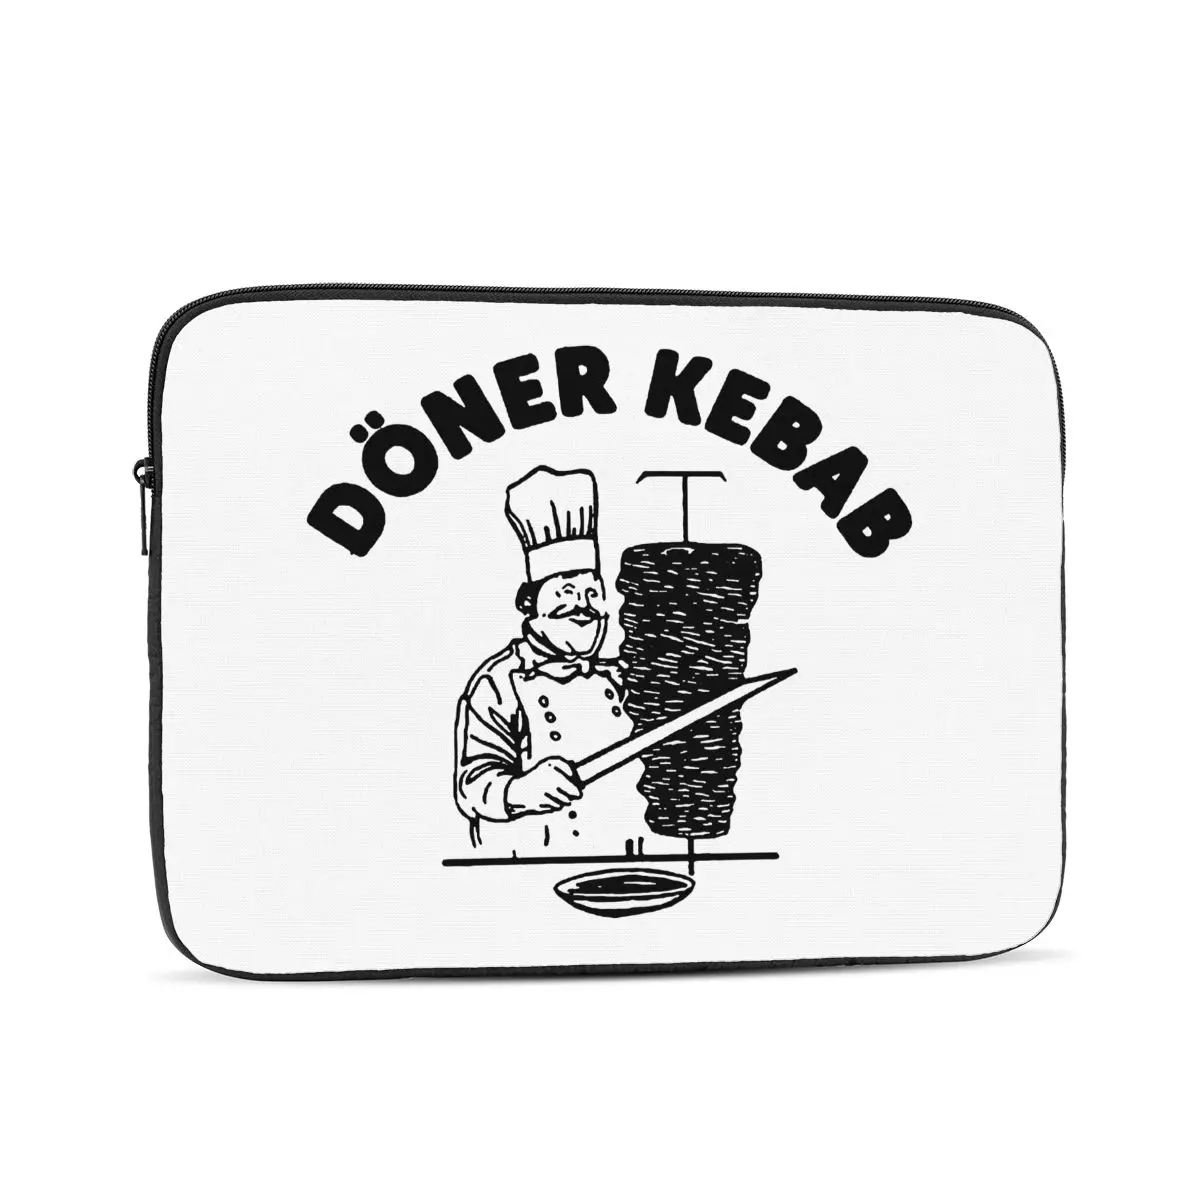 

Doner Kebab Computer ipad Laptop Cover Case17 15 13 12 10 Inch Laptop Sleeve Bag Portable Cover Fundas Pouch